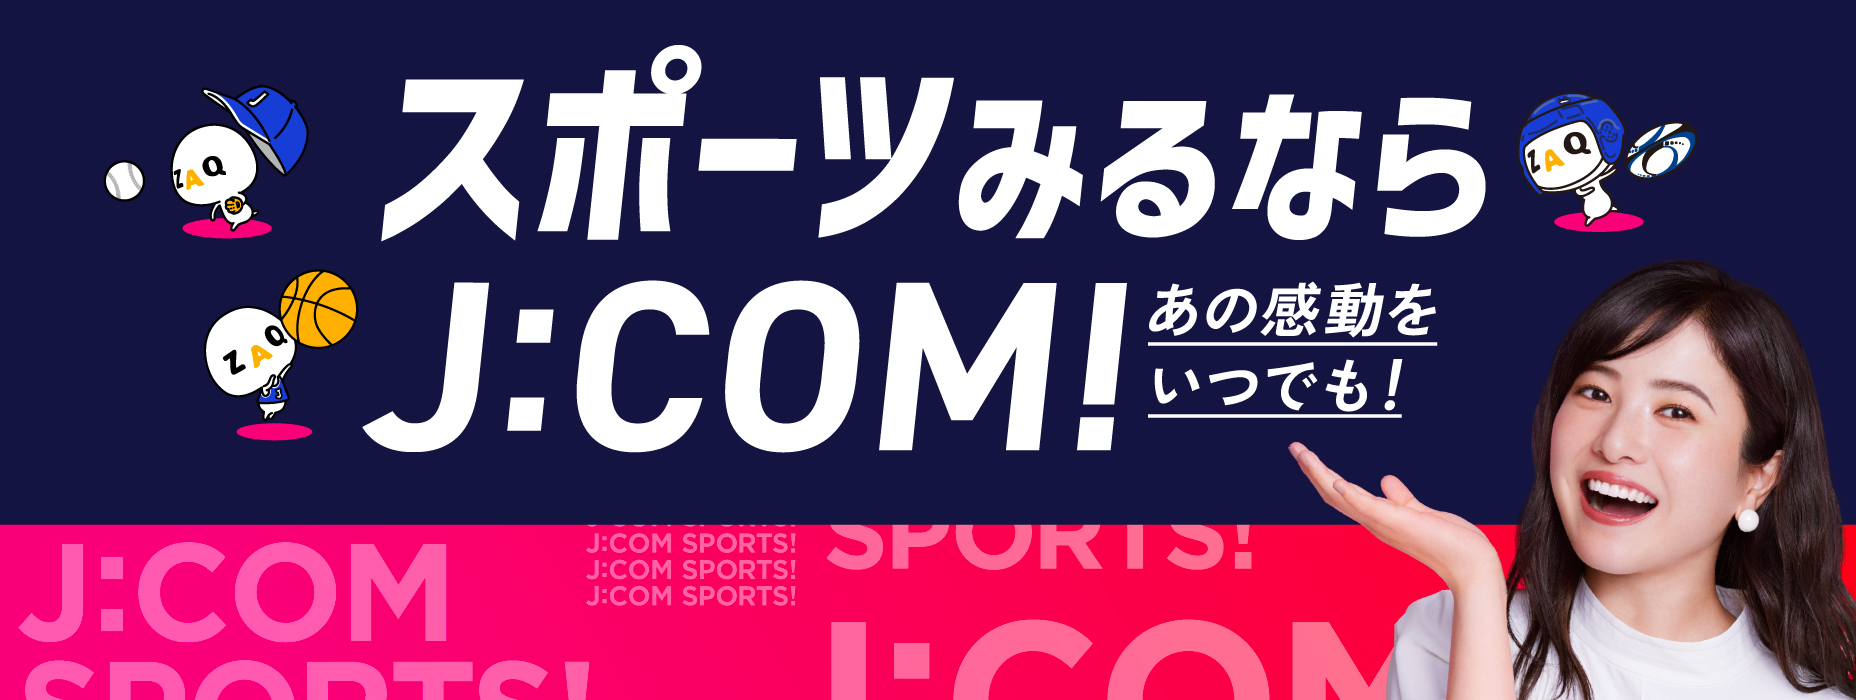 For sports, go to J:COM! Watch the game anytime!